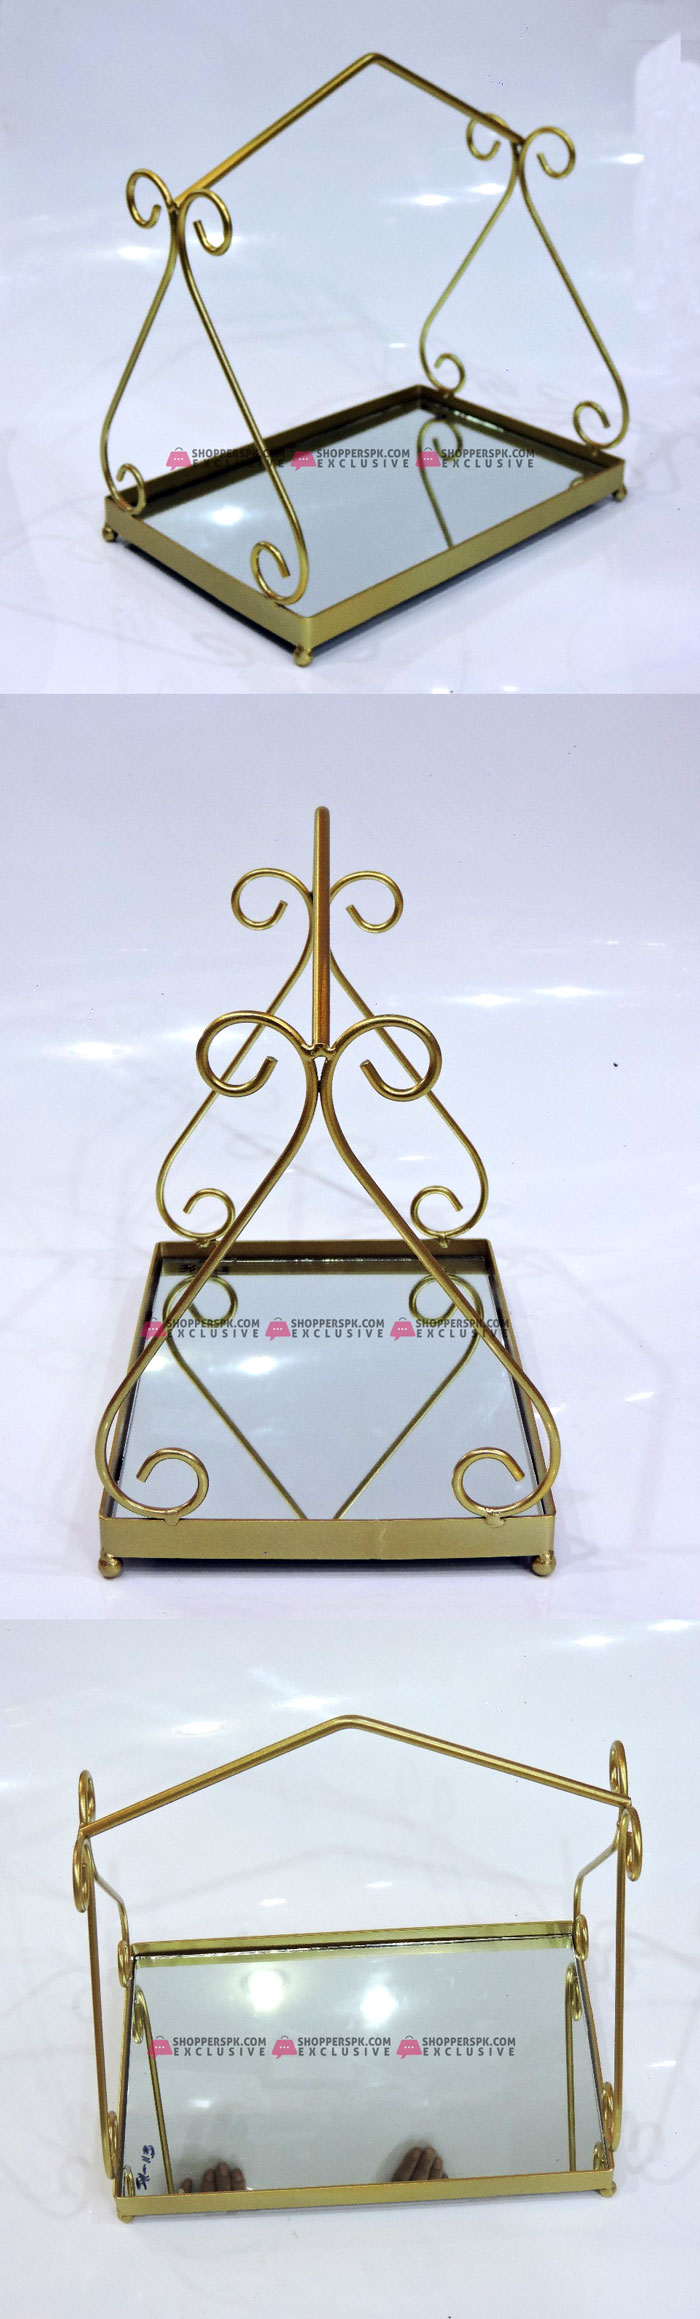 Wrought Iron Antique Style Cake Stand